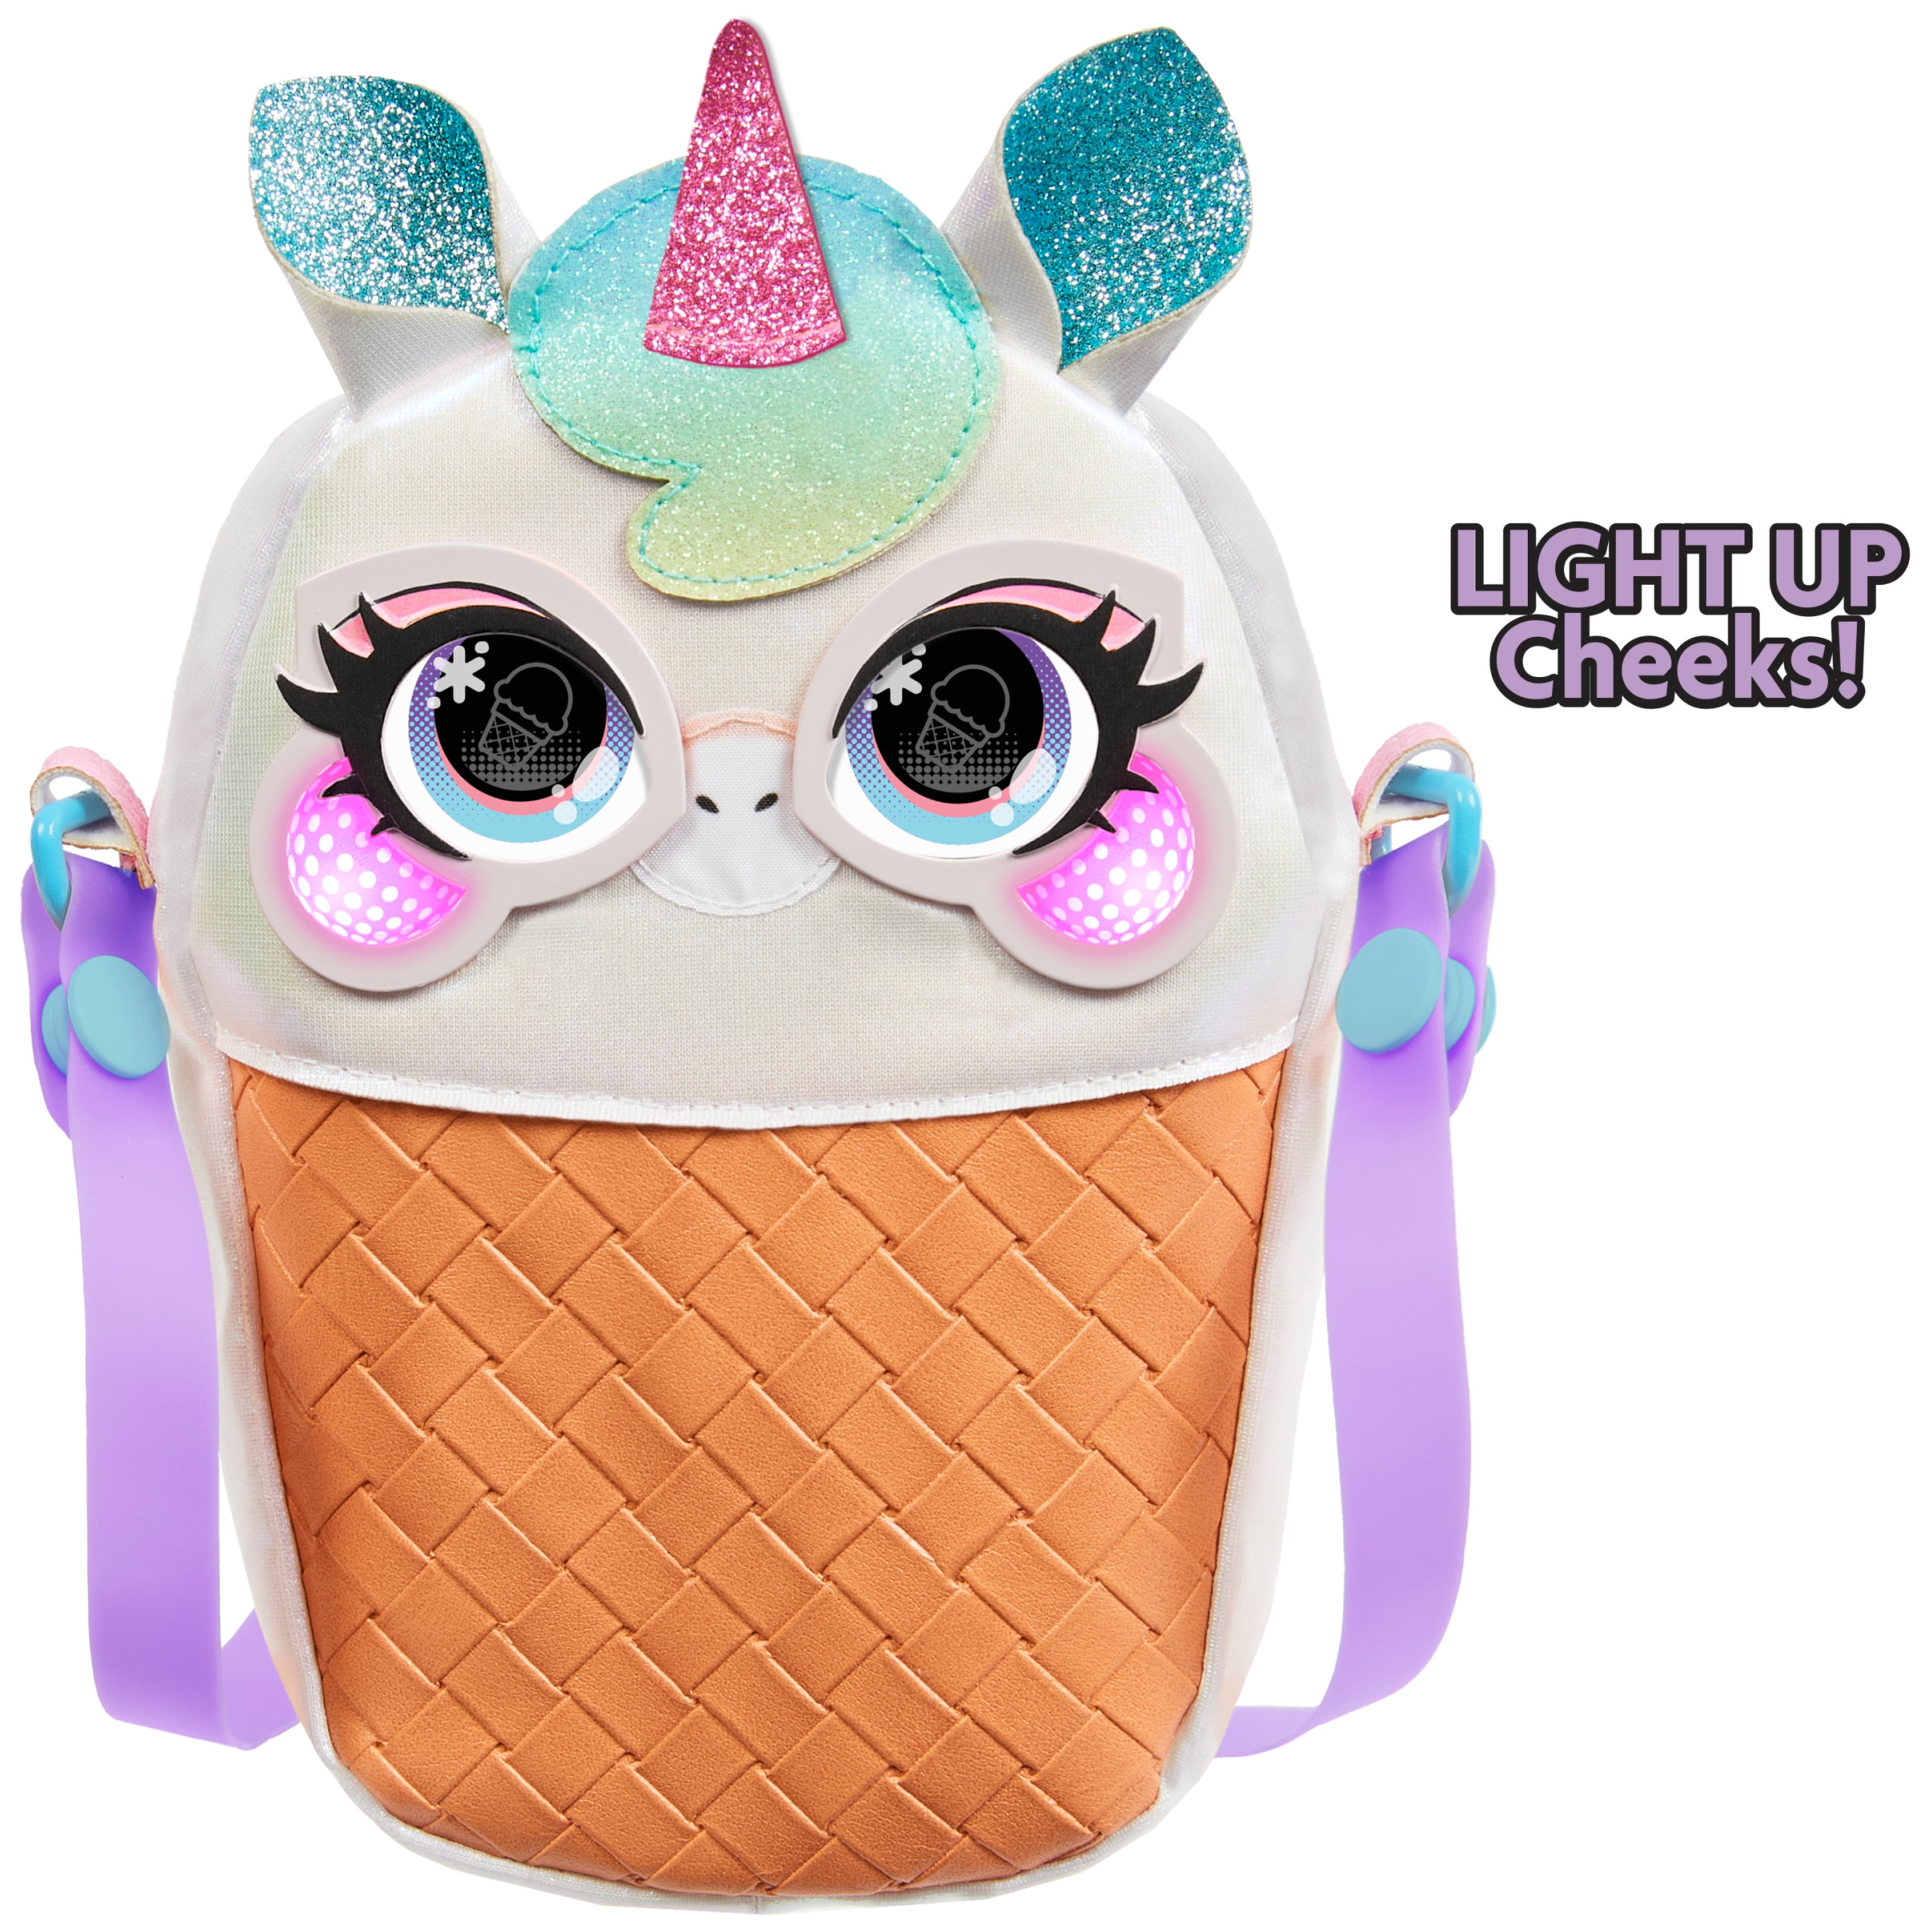  Purse Pets, Glamicorn Unicorn Interactive Pet Toy & Crossbody  Kids Purse with Over 25 Sounds and Reactions, Shoulder Bag for Girls,  Trendy Tween Gifts : Home & Kitchen